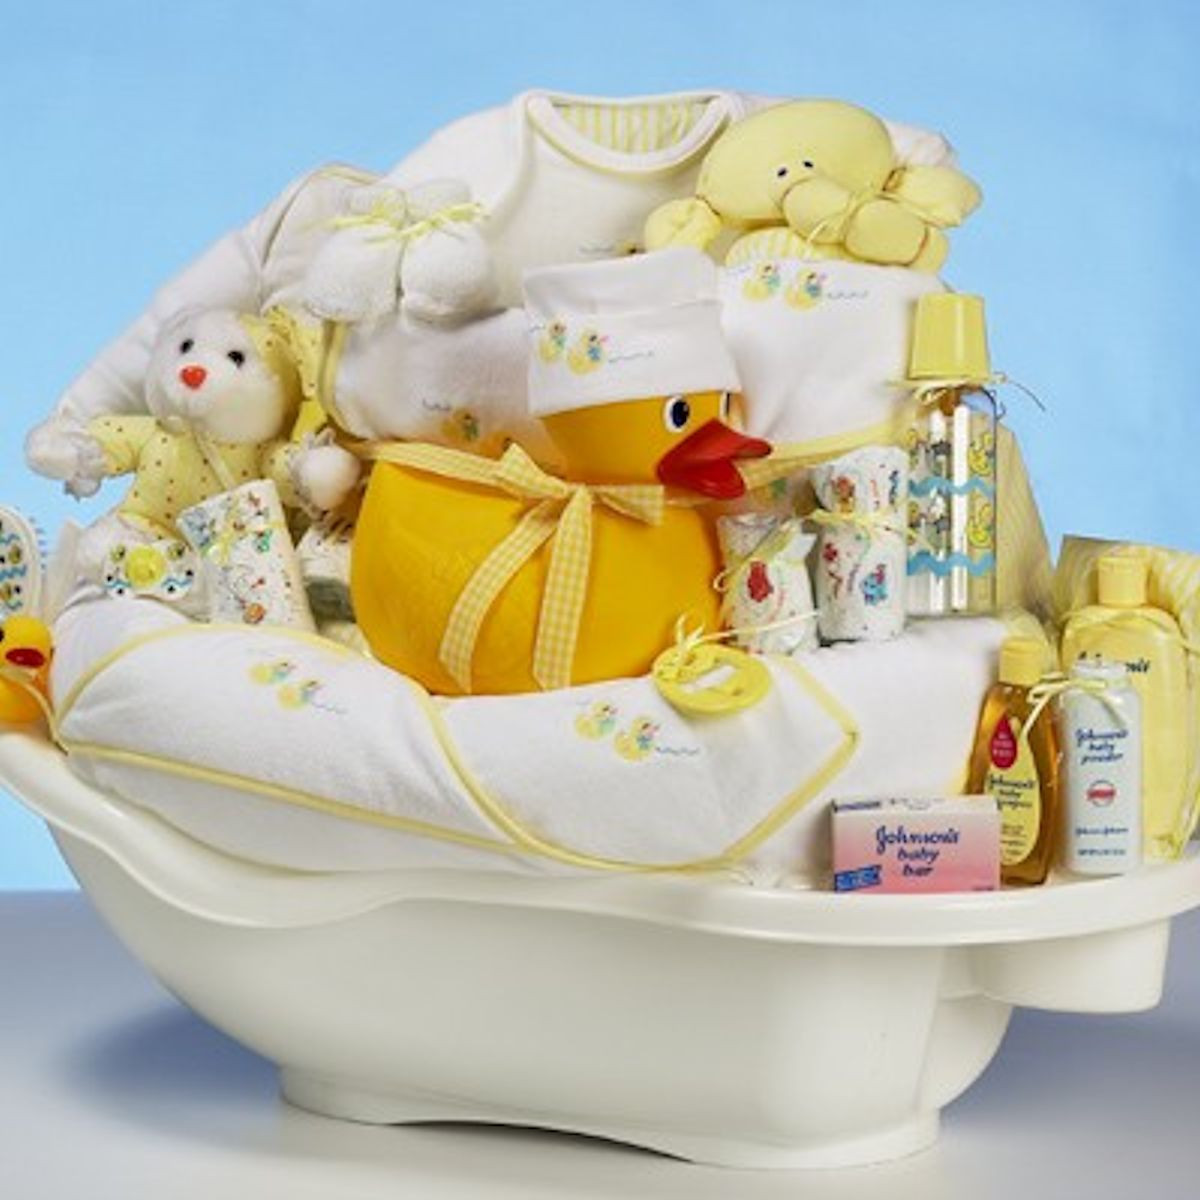 Baby Bath Gift Ideas
 Deluxe Baby Shower Gift Set Neutral